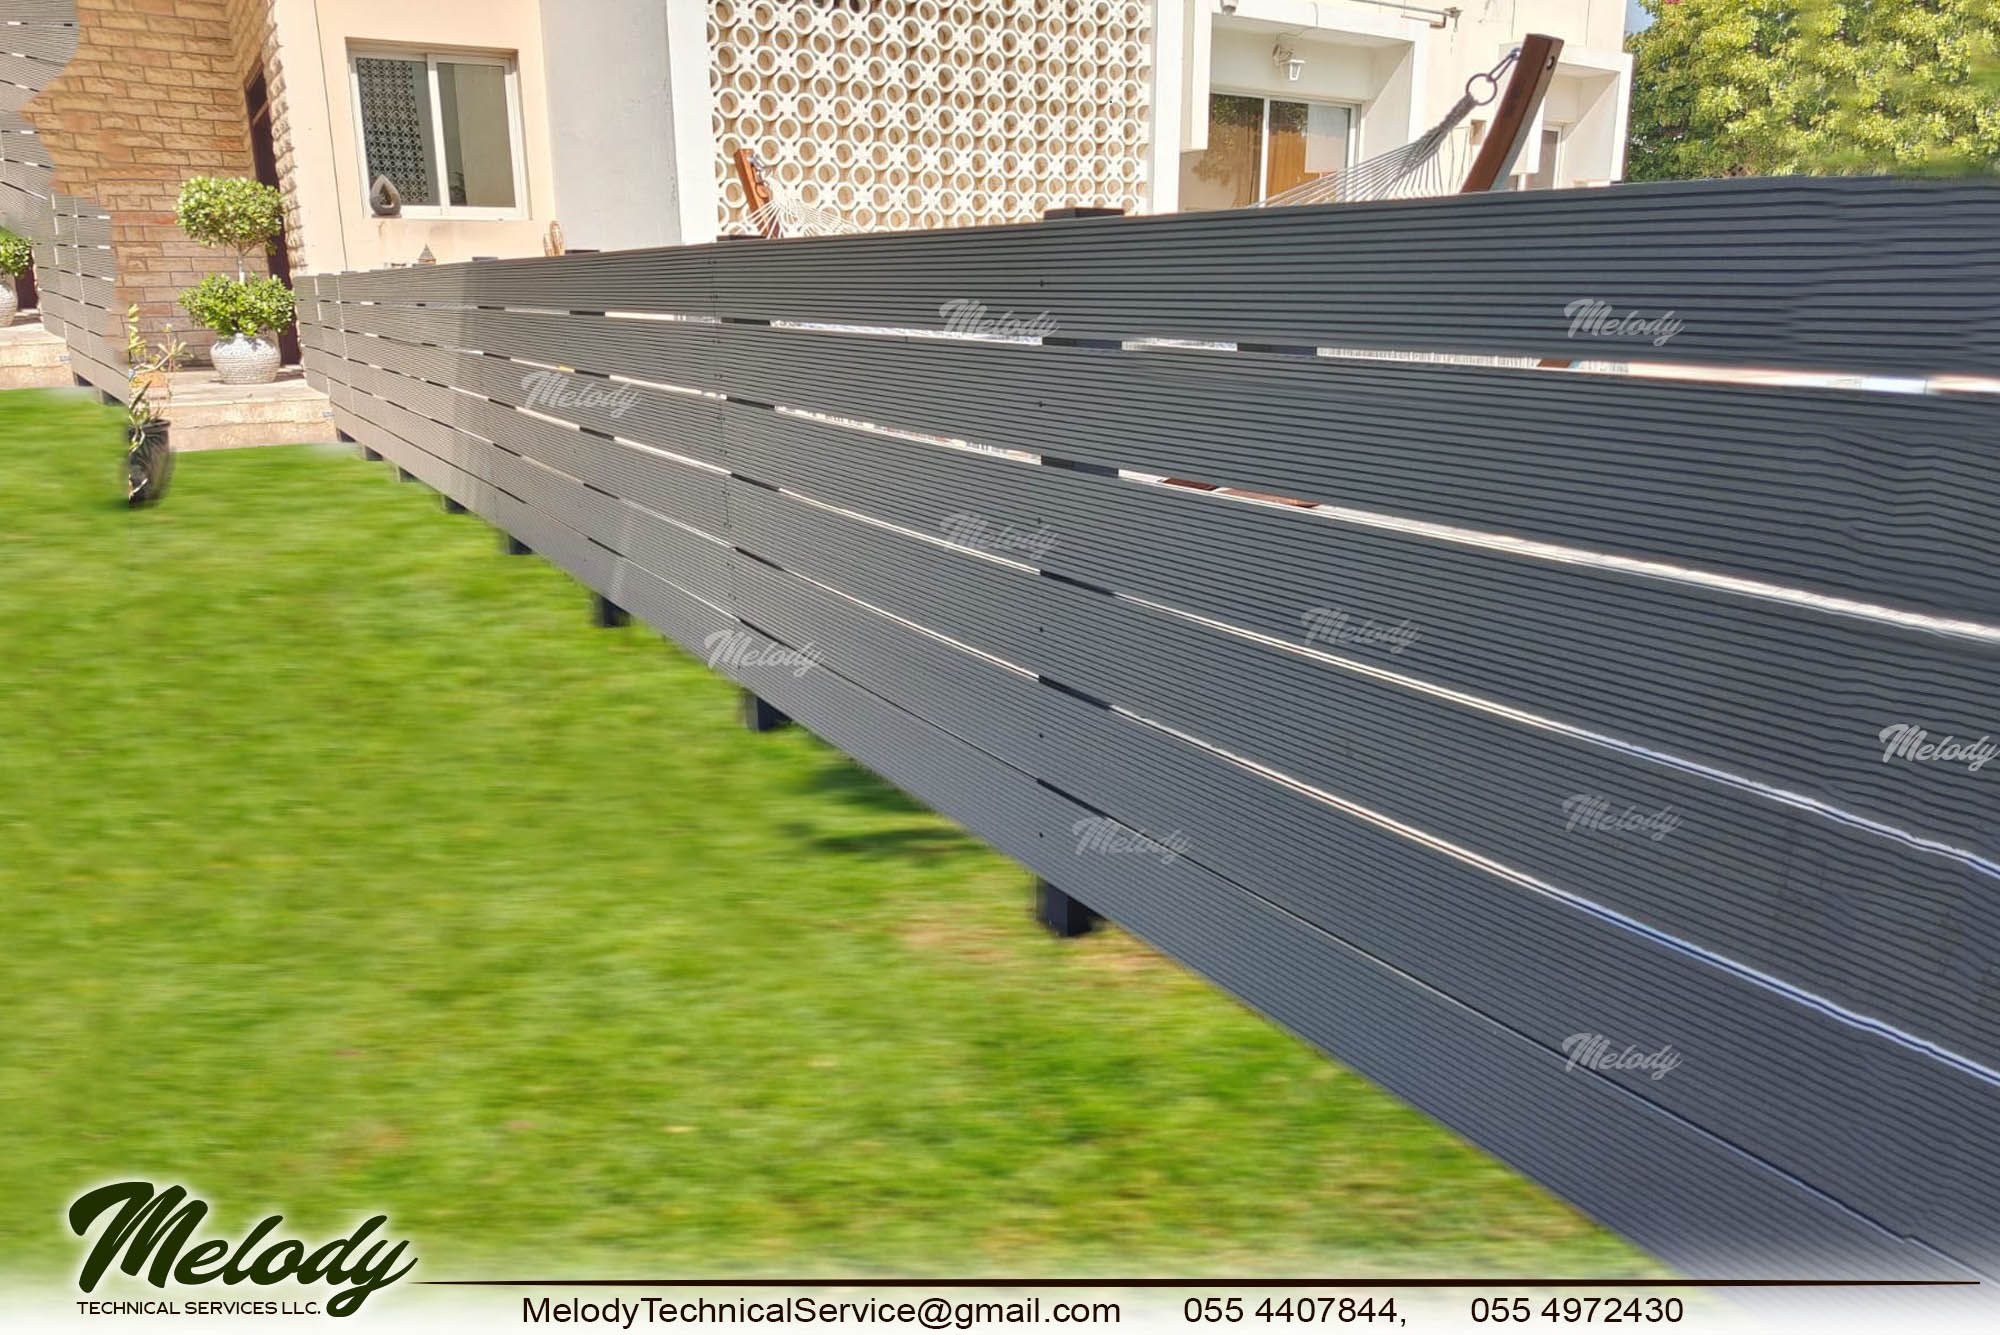 The Best WPC Fence Provider in Dubai - Suppliers (2).jpg